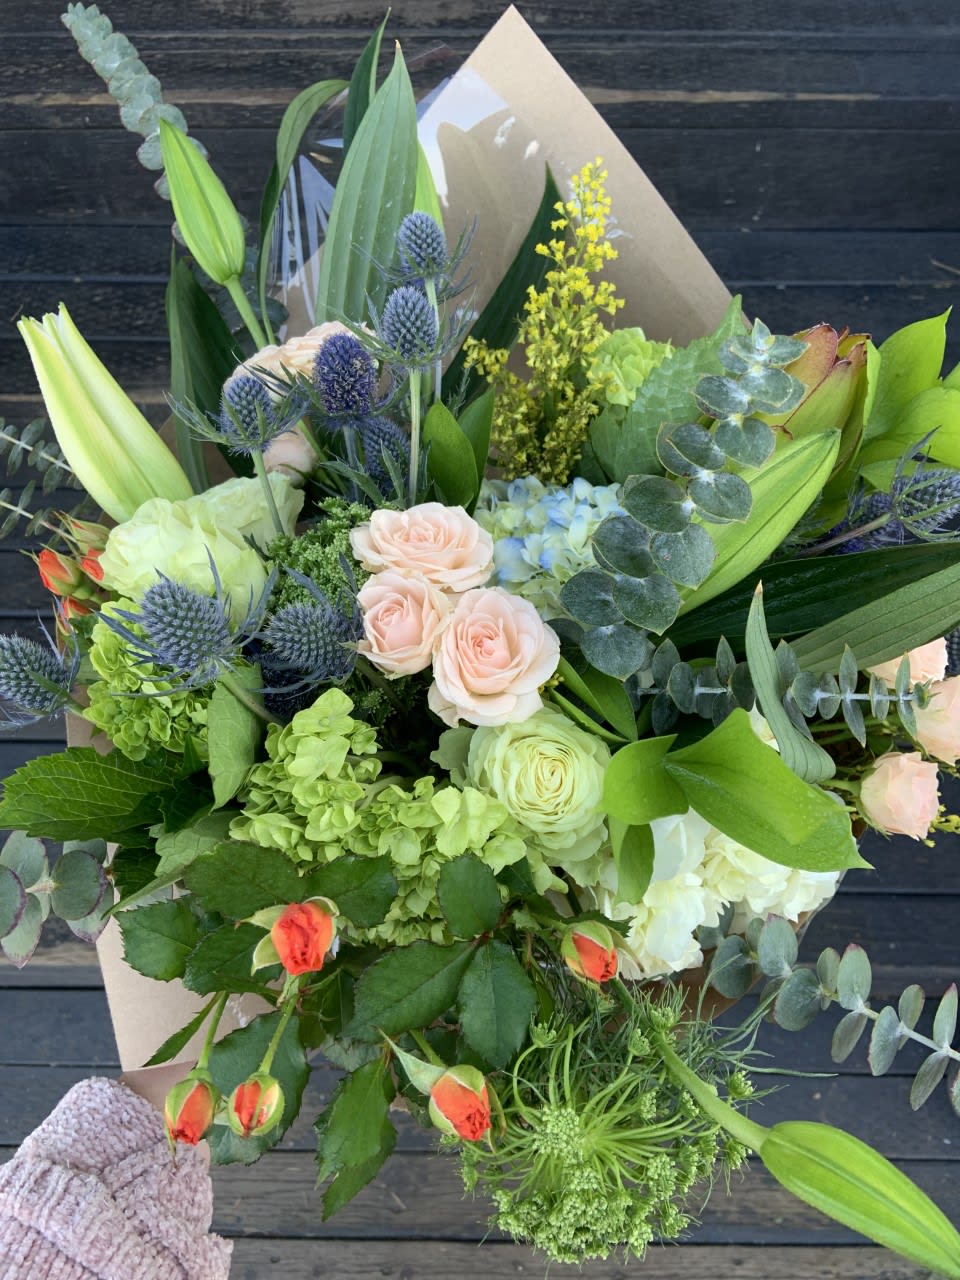 PICK YOUR COLOR PALETTE!
Ditch the vase and send a custom fresh-cut hand-tied